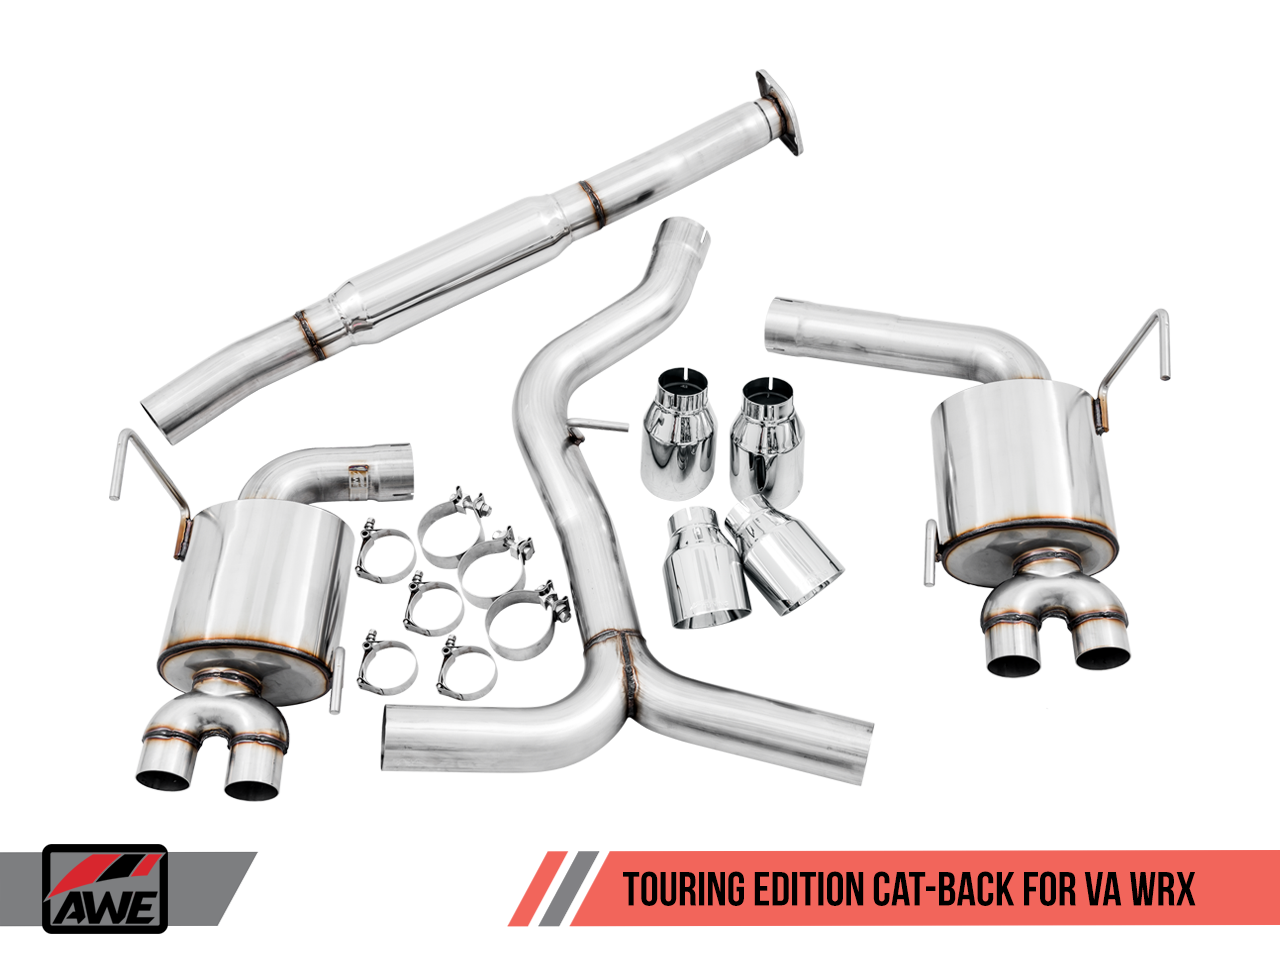 AWE Tuning Touring Edition Exhaust for 2015+ VA WRX Sedan - Chrome Silver Quad Tips (102mm)